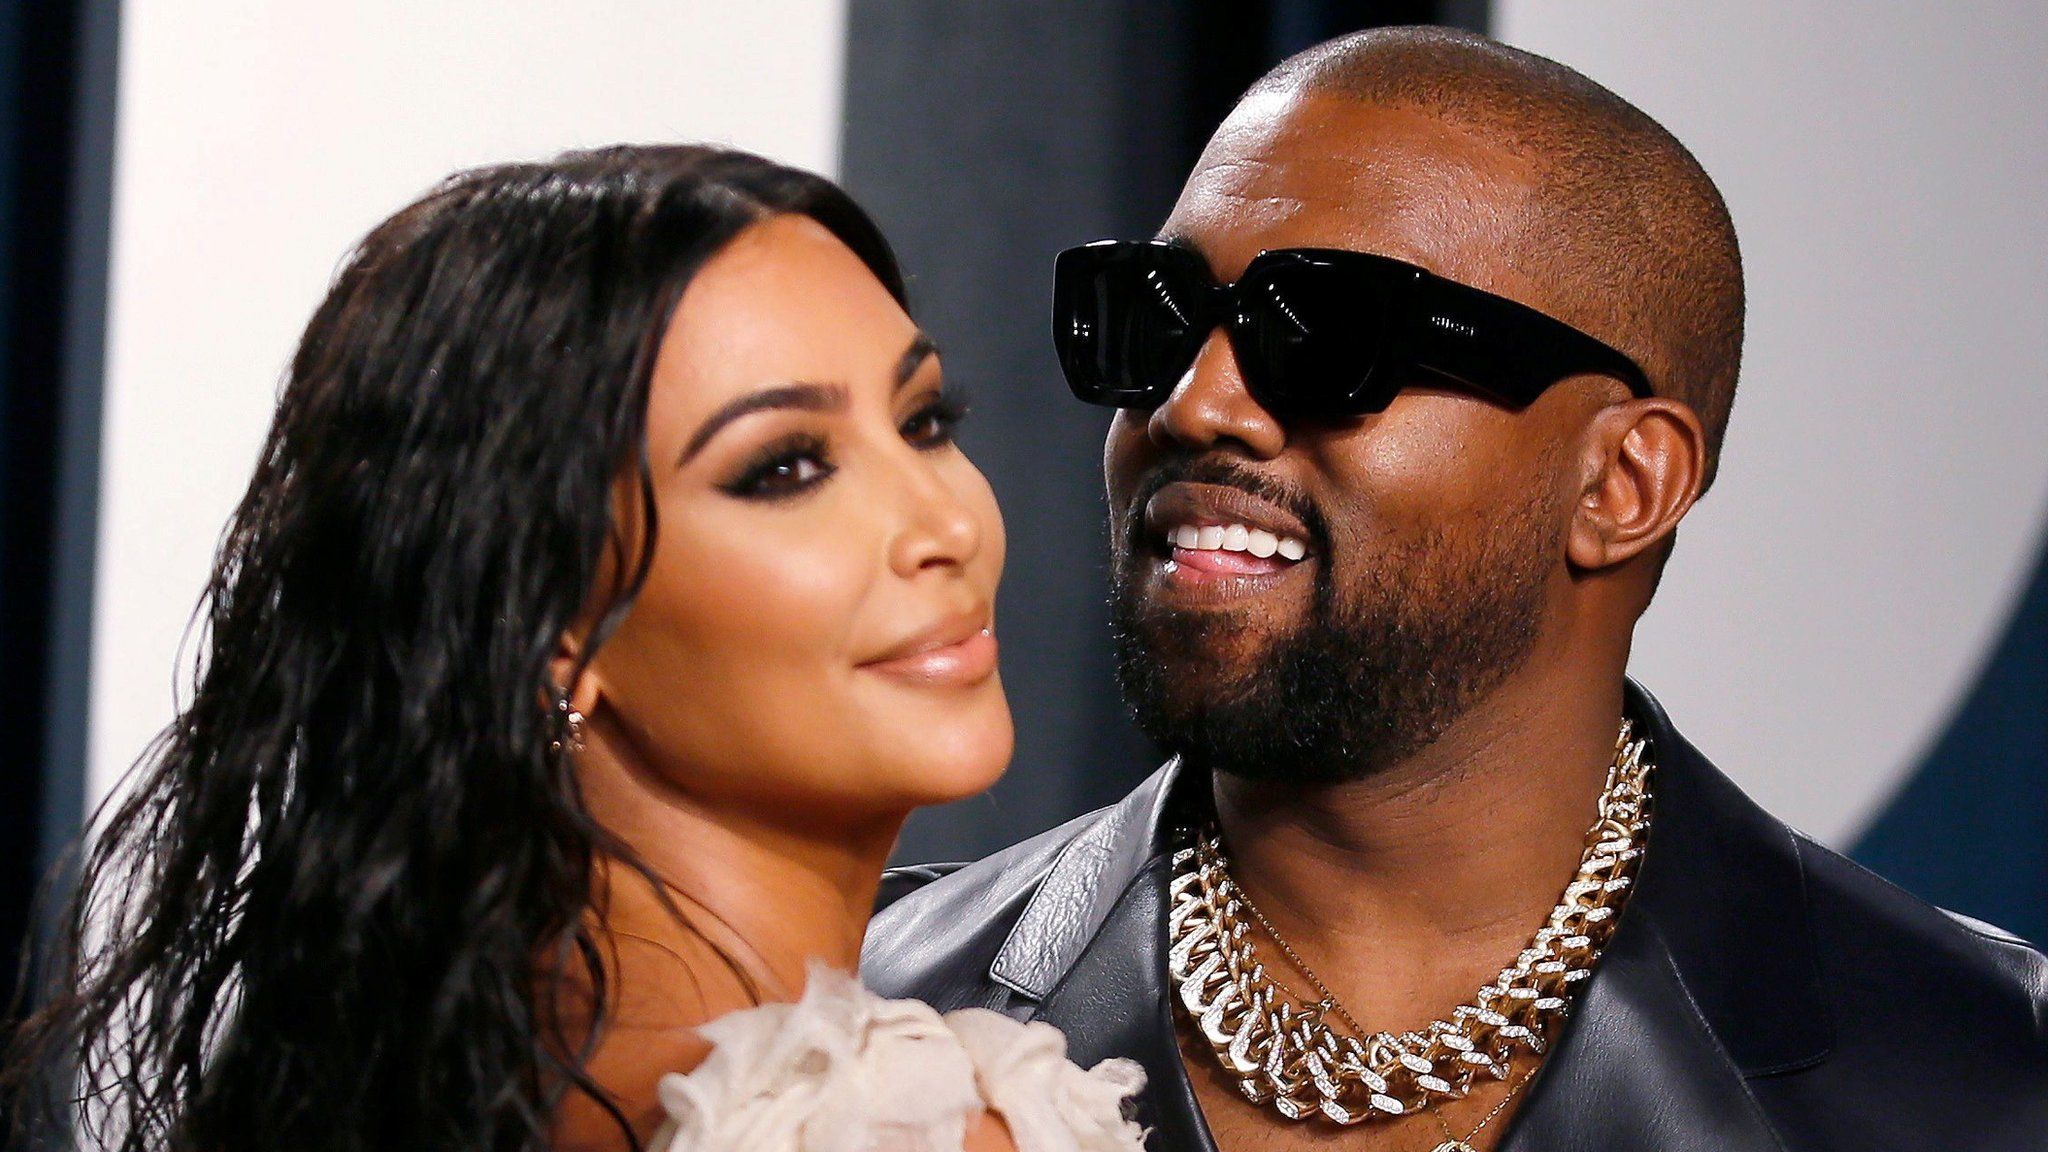 Kim Kardashian and Kanye West attend the Vanity Fair Oscar party in Beverly Hills during the 92nd Academy Awards, in Los Angeles, California, U.S., February 9, 2020